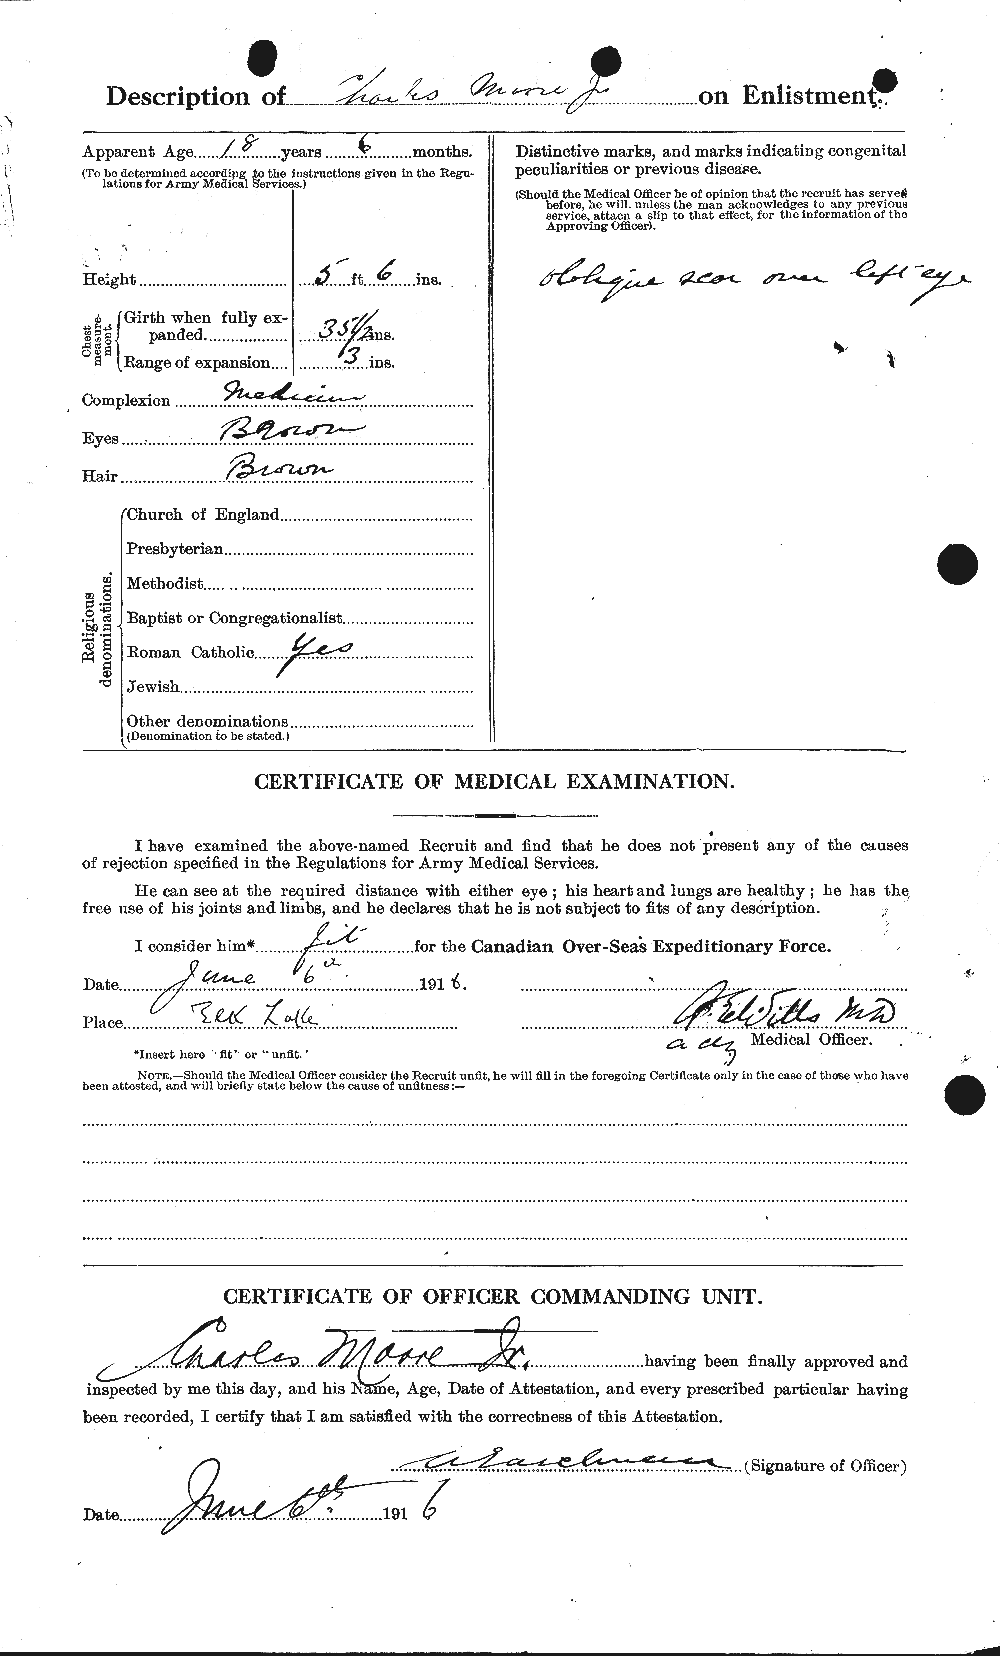 Personnel Records of the First World War - CEF 506487b